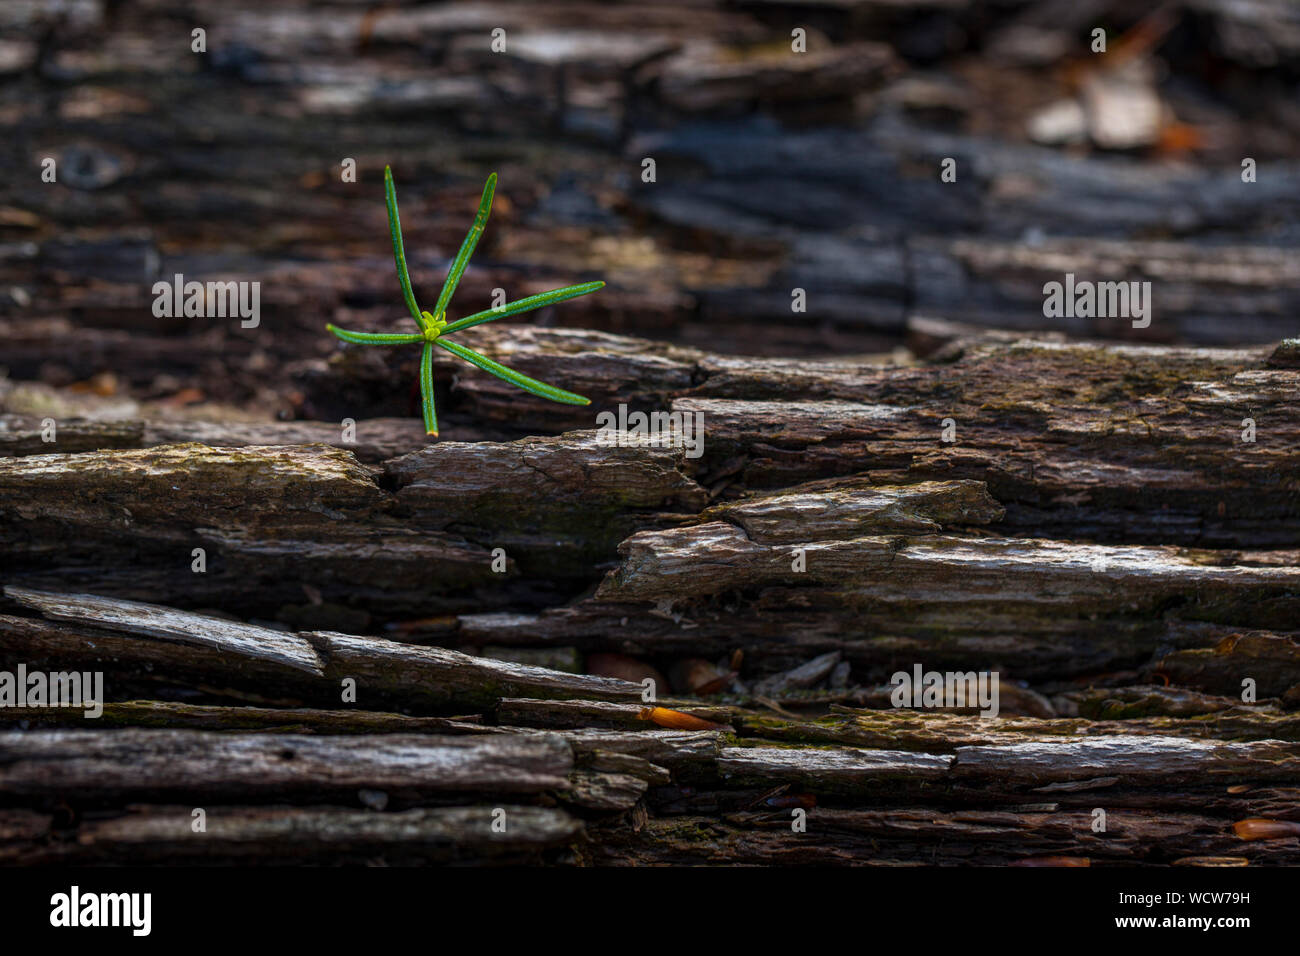 young fragile  sprout of a tree, named Picea glauca, on a brown tree trunk Stock Photo